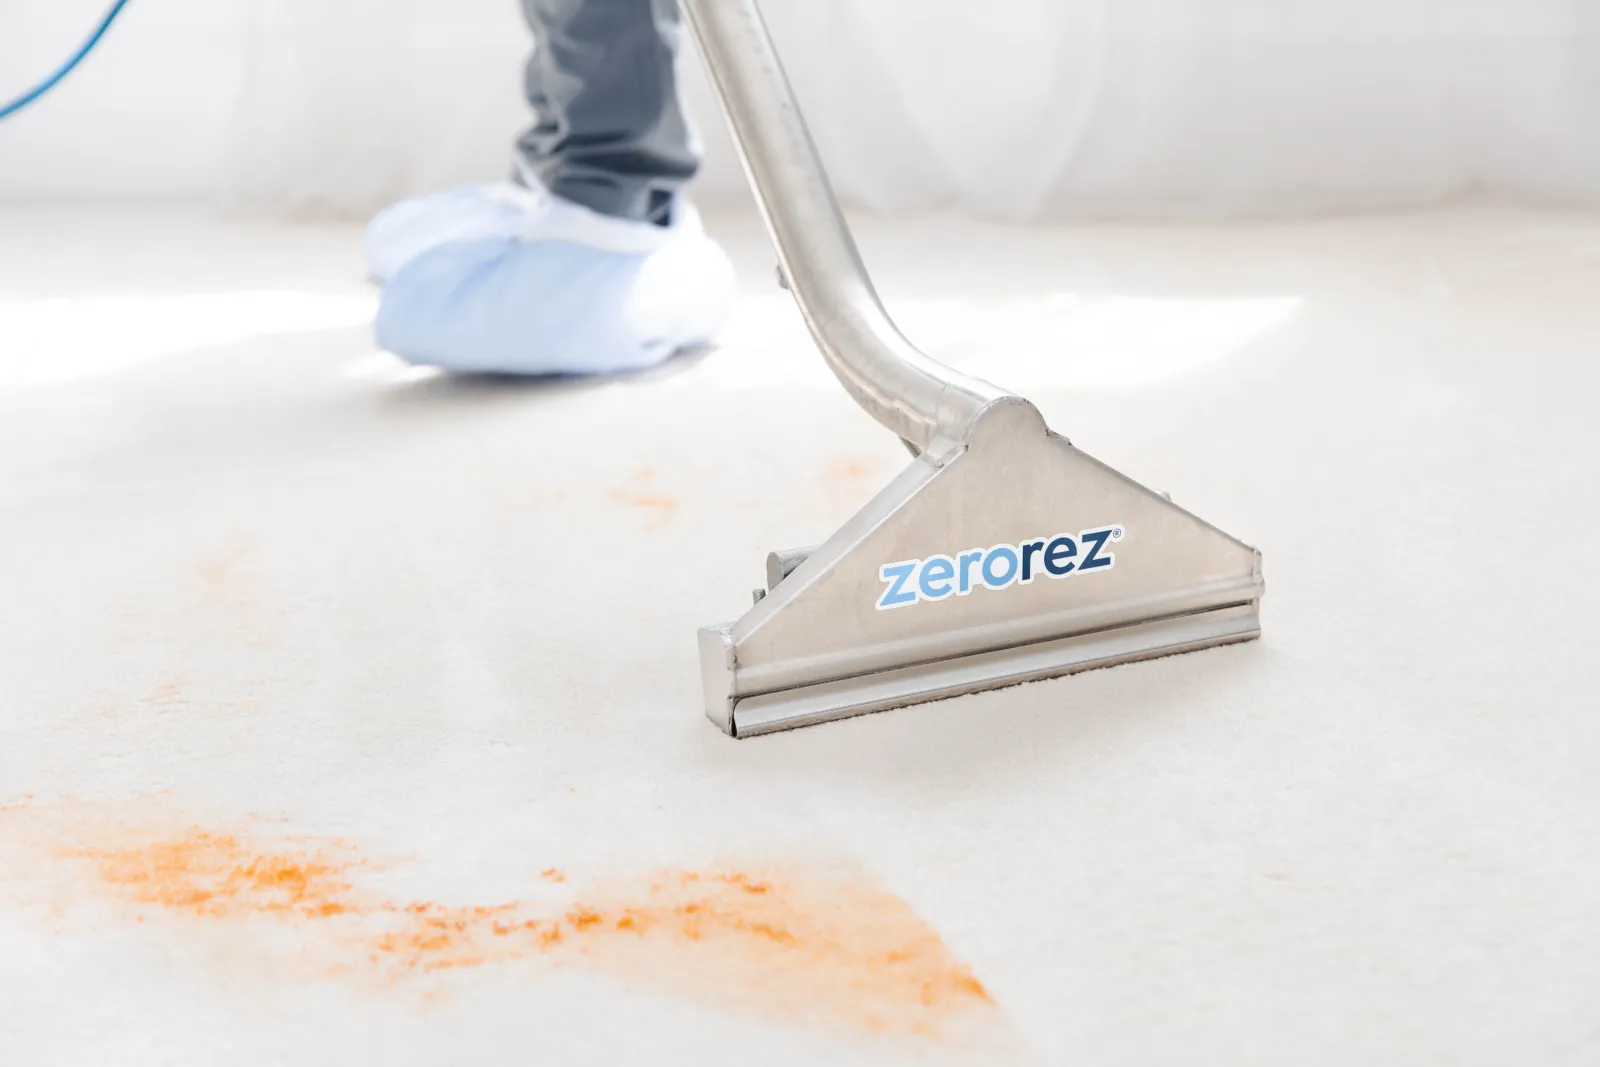 Zerorez Zr™ Wand extracting dirt and grime from a white carpet, leaving no sticky residue behind after cleaning